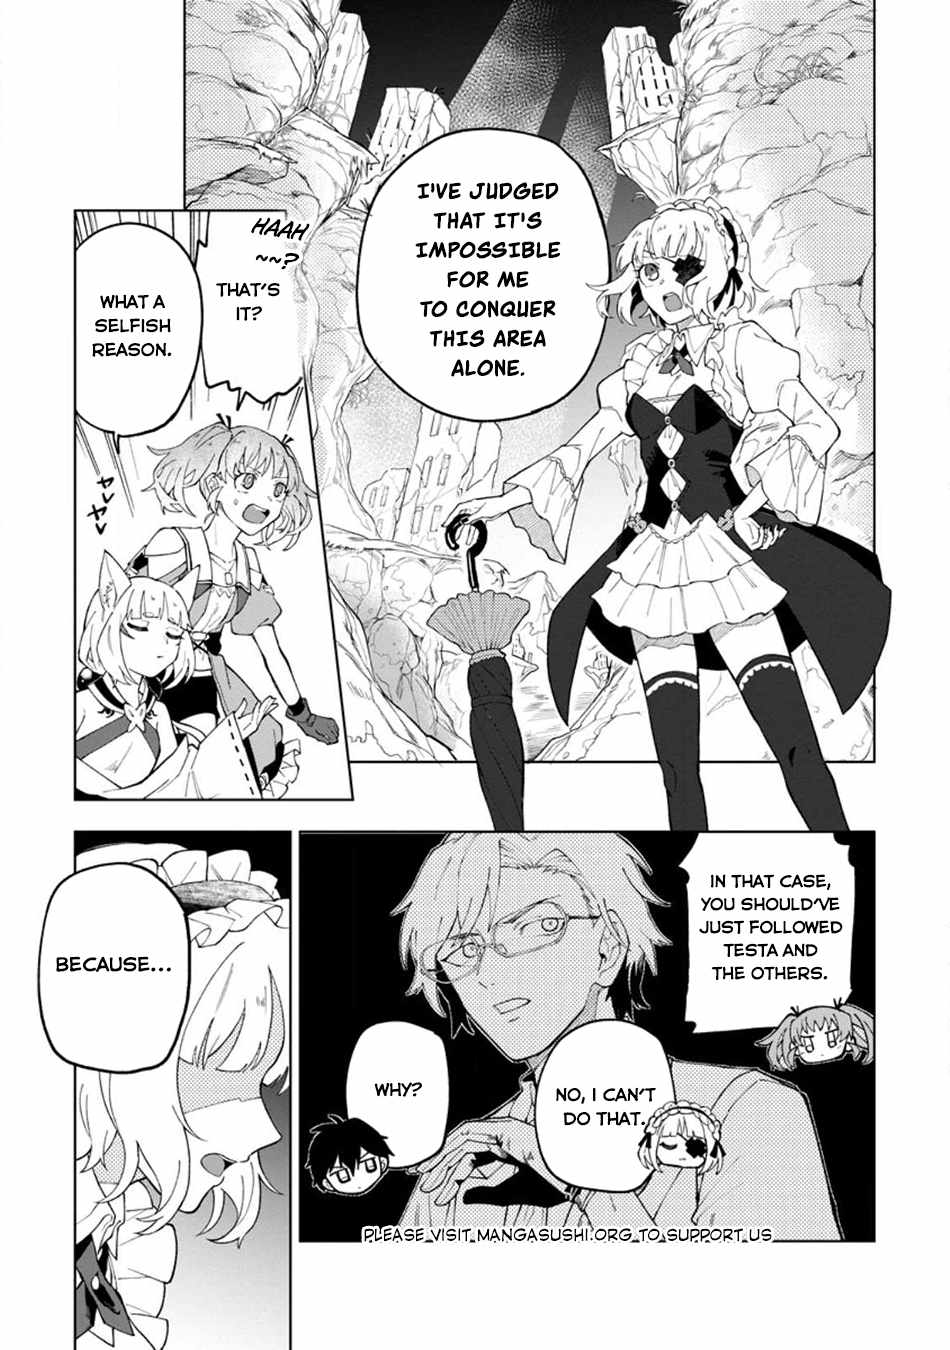 The White Mage Who Was Banished From The Hero's Party Is Picked Up By An S Rank Adventurer~ This White Mage Is Too Out Of The Ordinary! - 25 page 6-08f86694